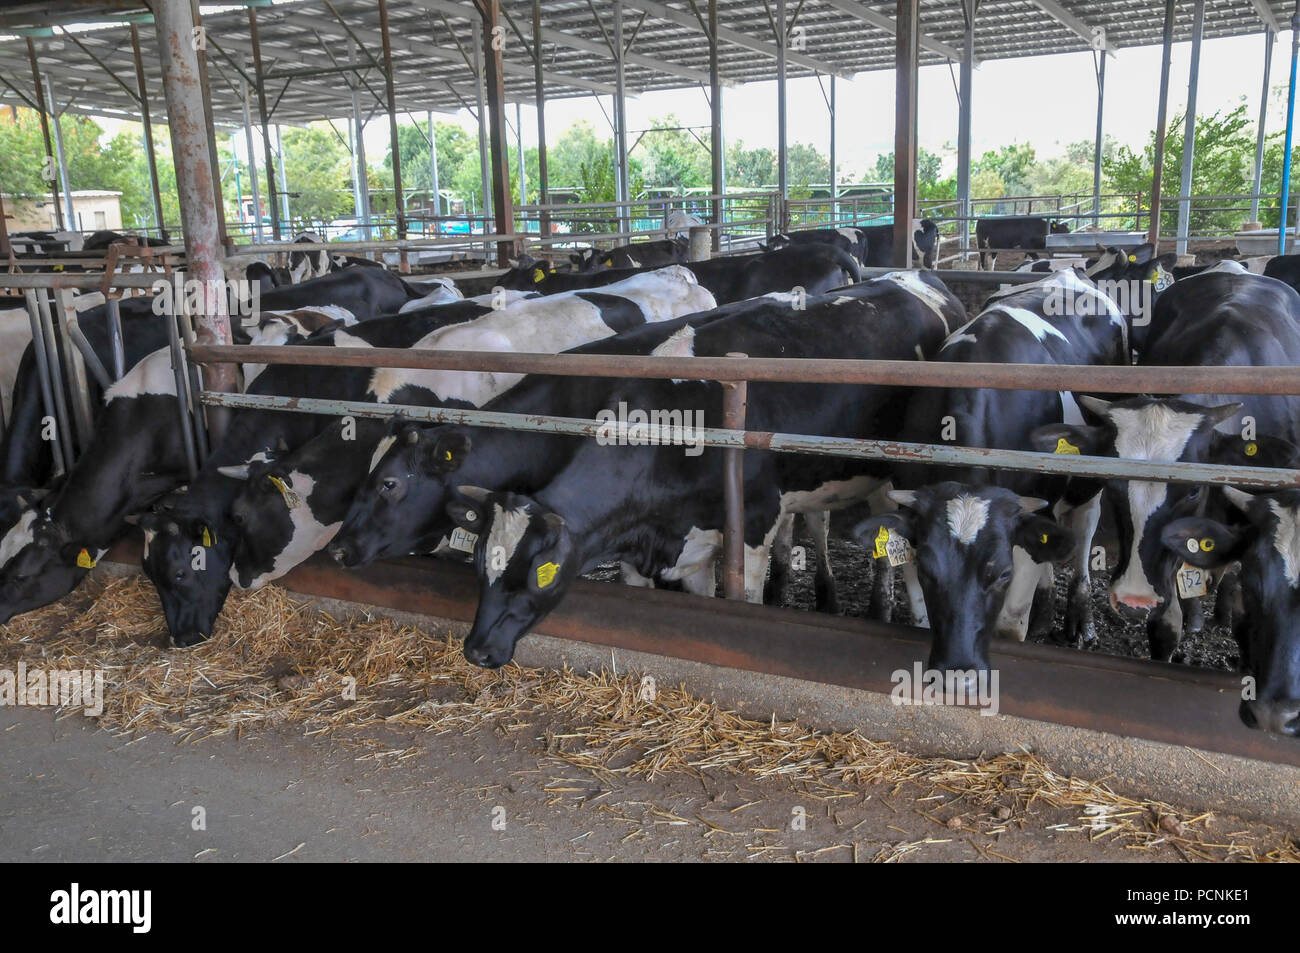 cows in dairy farm the animals in a pen. Photographed at Kibbutz harduf, Israel Stock Photo